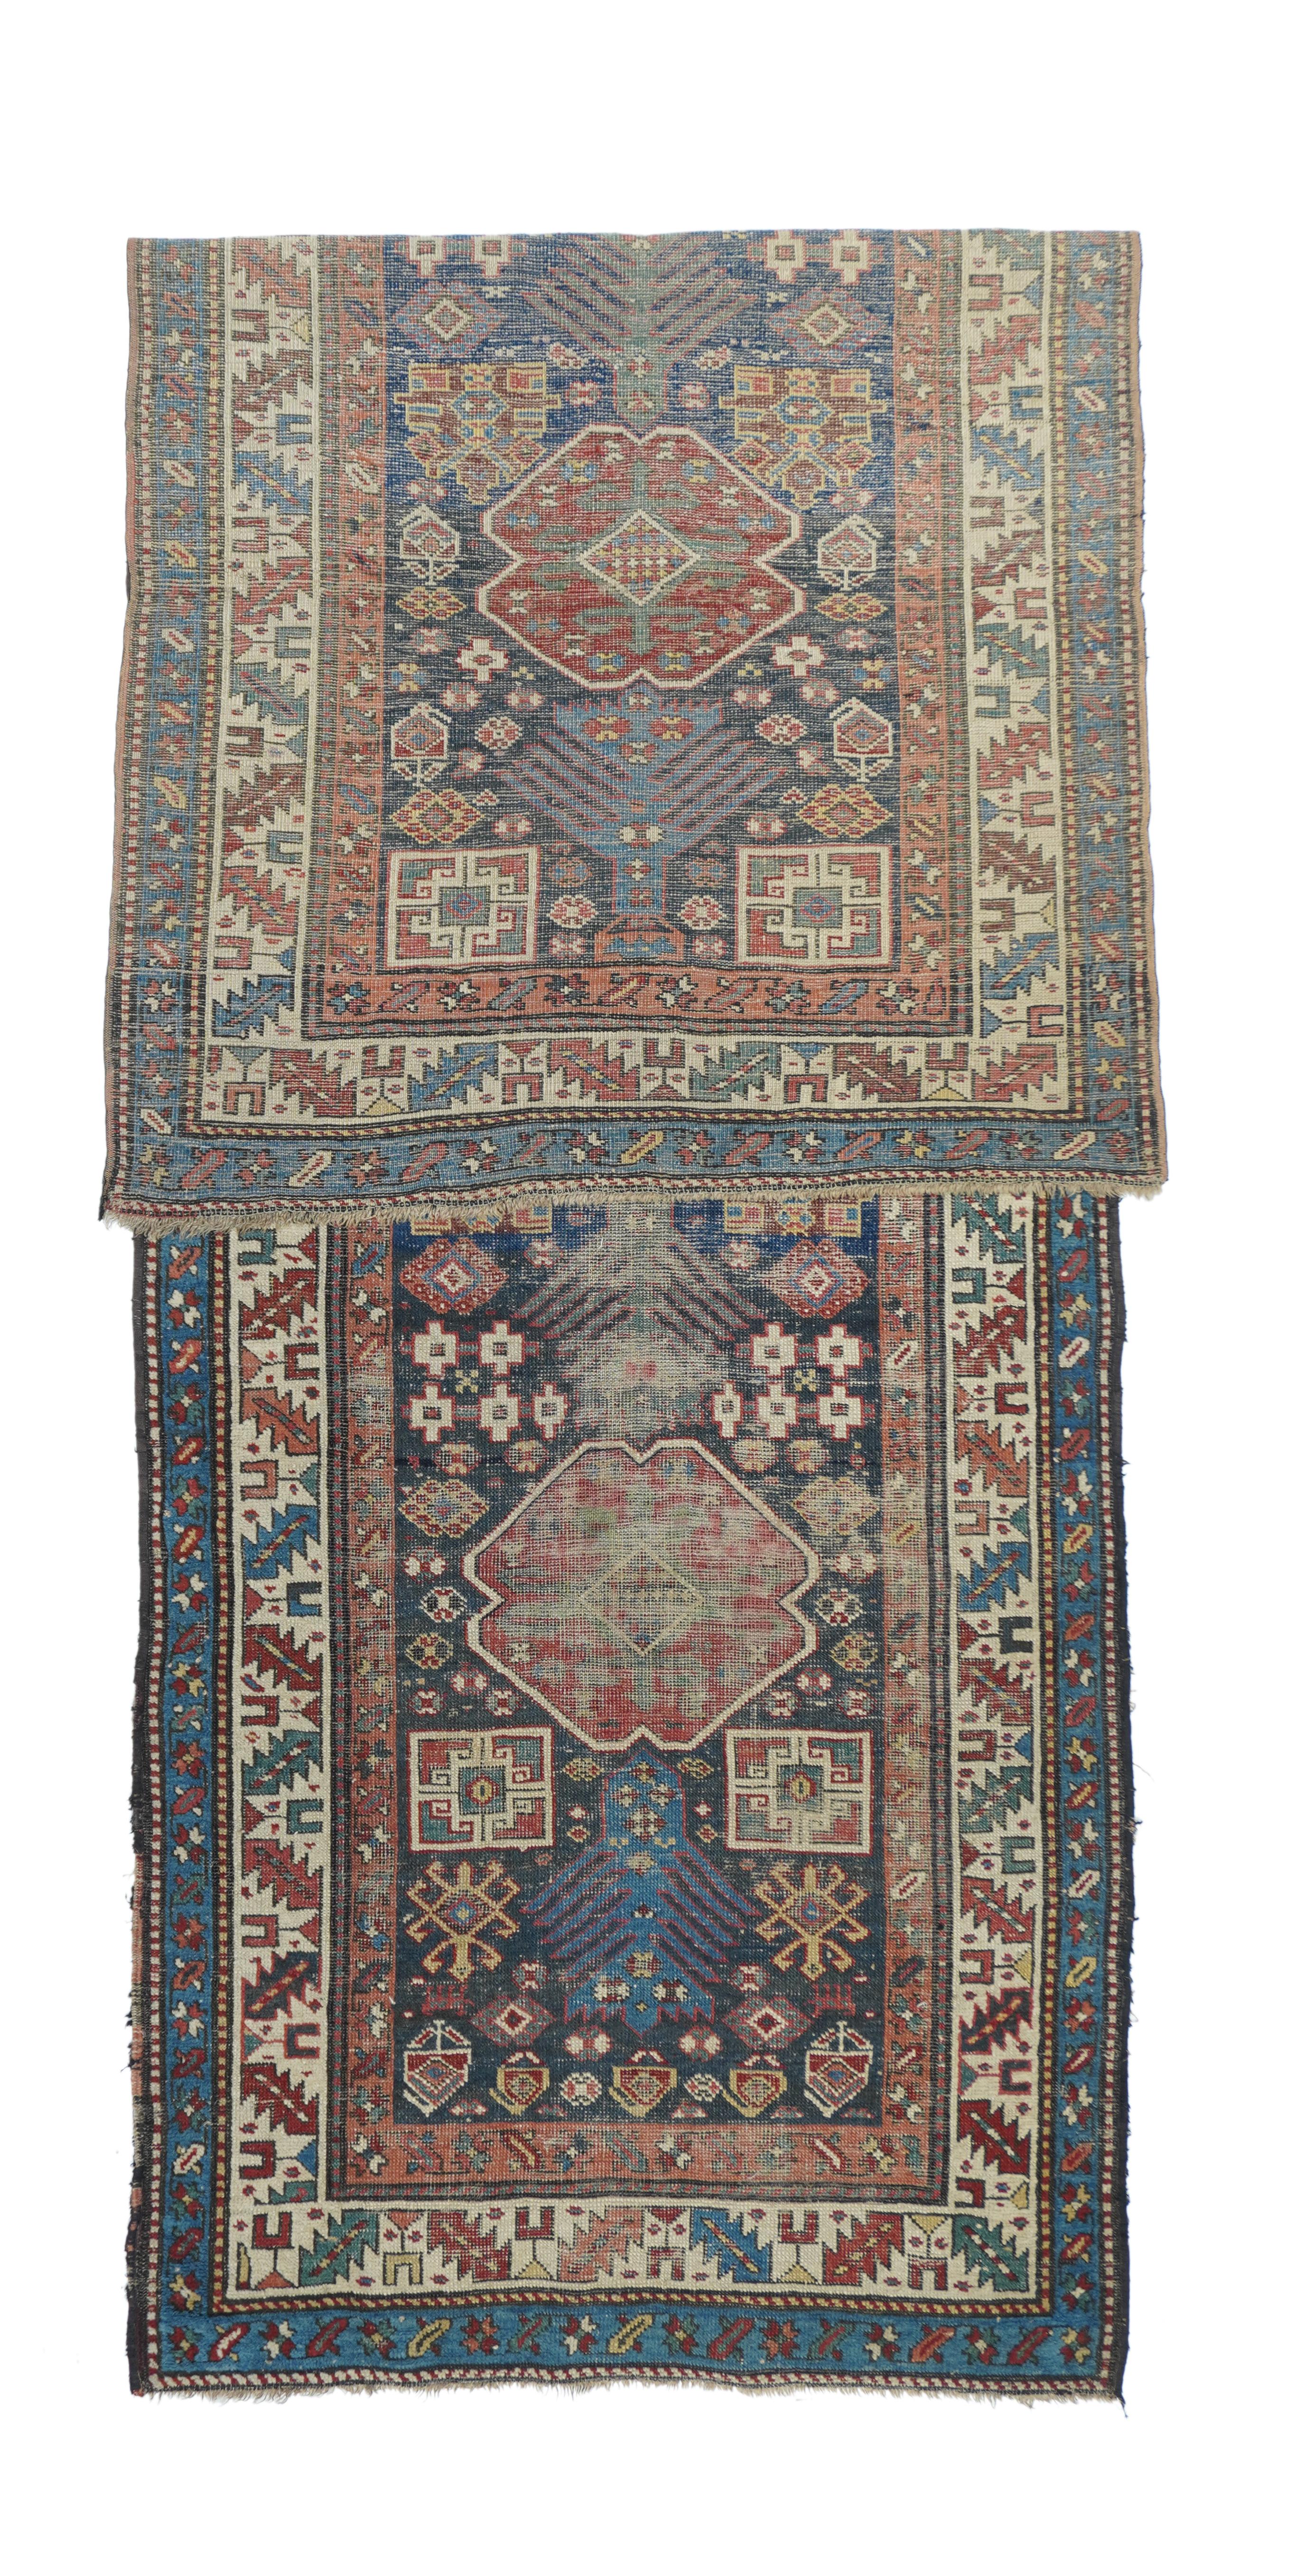 Antique Kazak Rug 3'6'' x 10'9''. East rather than west Caucasian, this sapphire blue ground Kenare (runner) displays four red pinched oval medallions, with secondary Kufesque squares and tertiary geometric ivory flowers. Ecru main border with